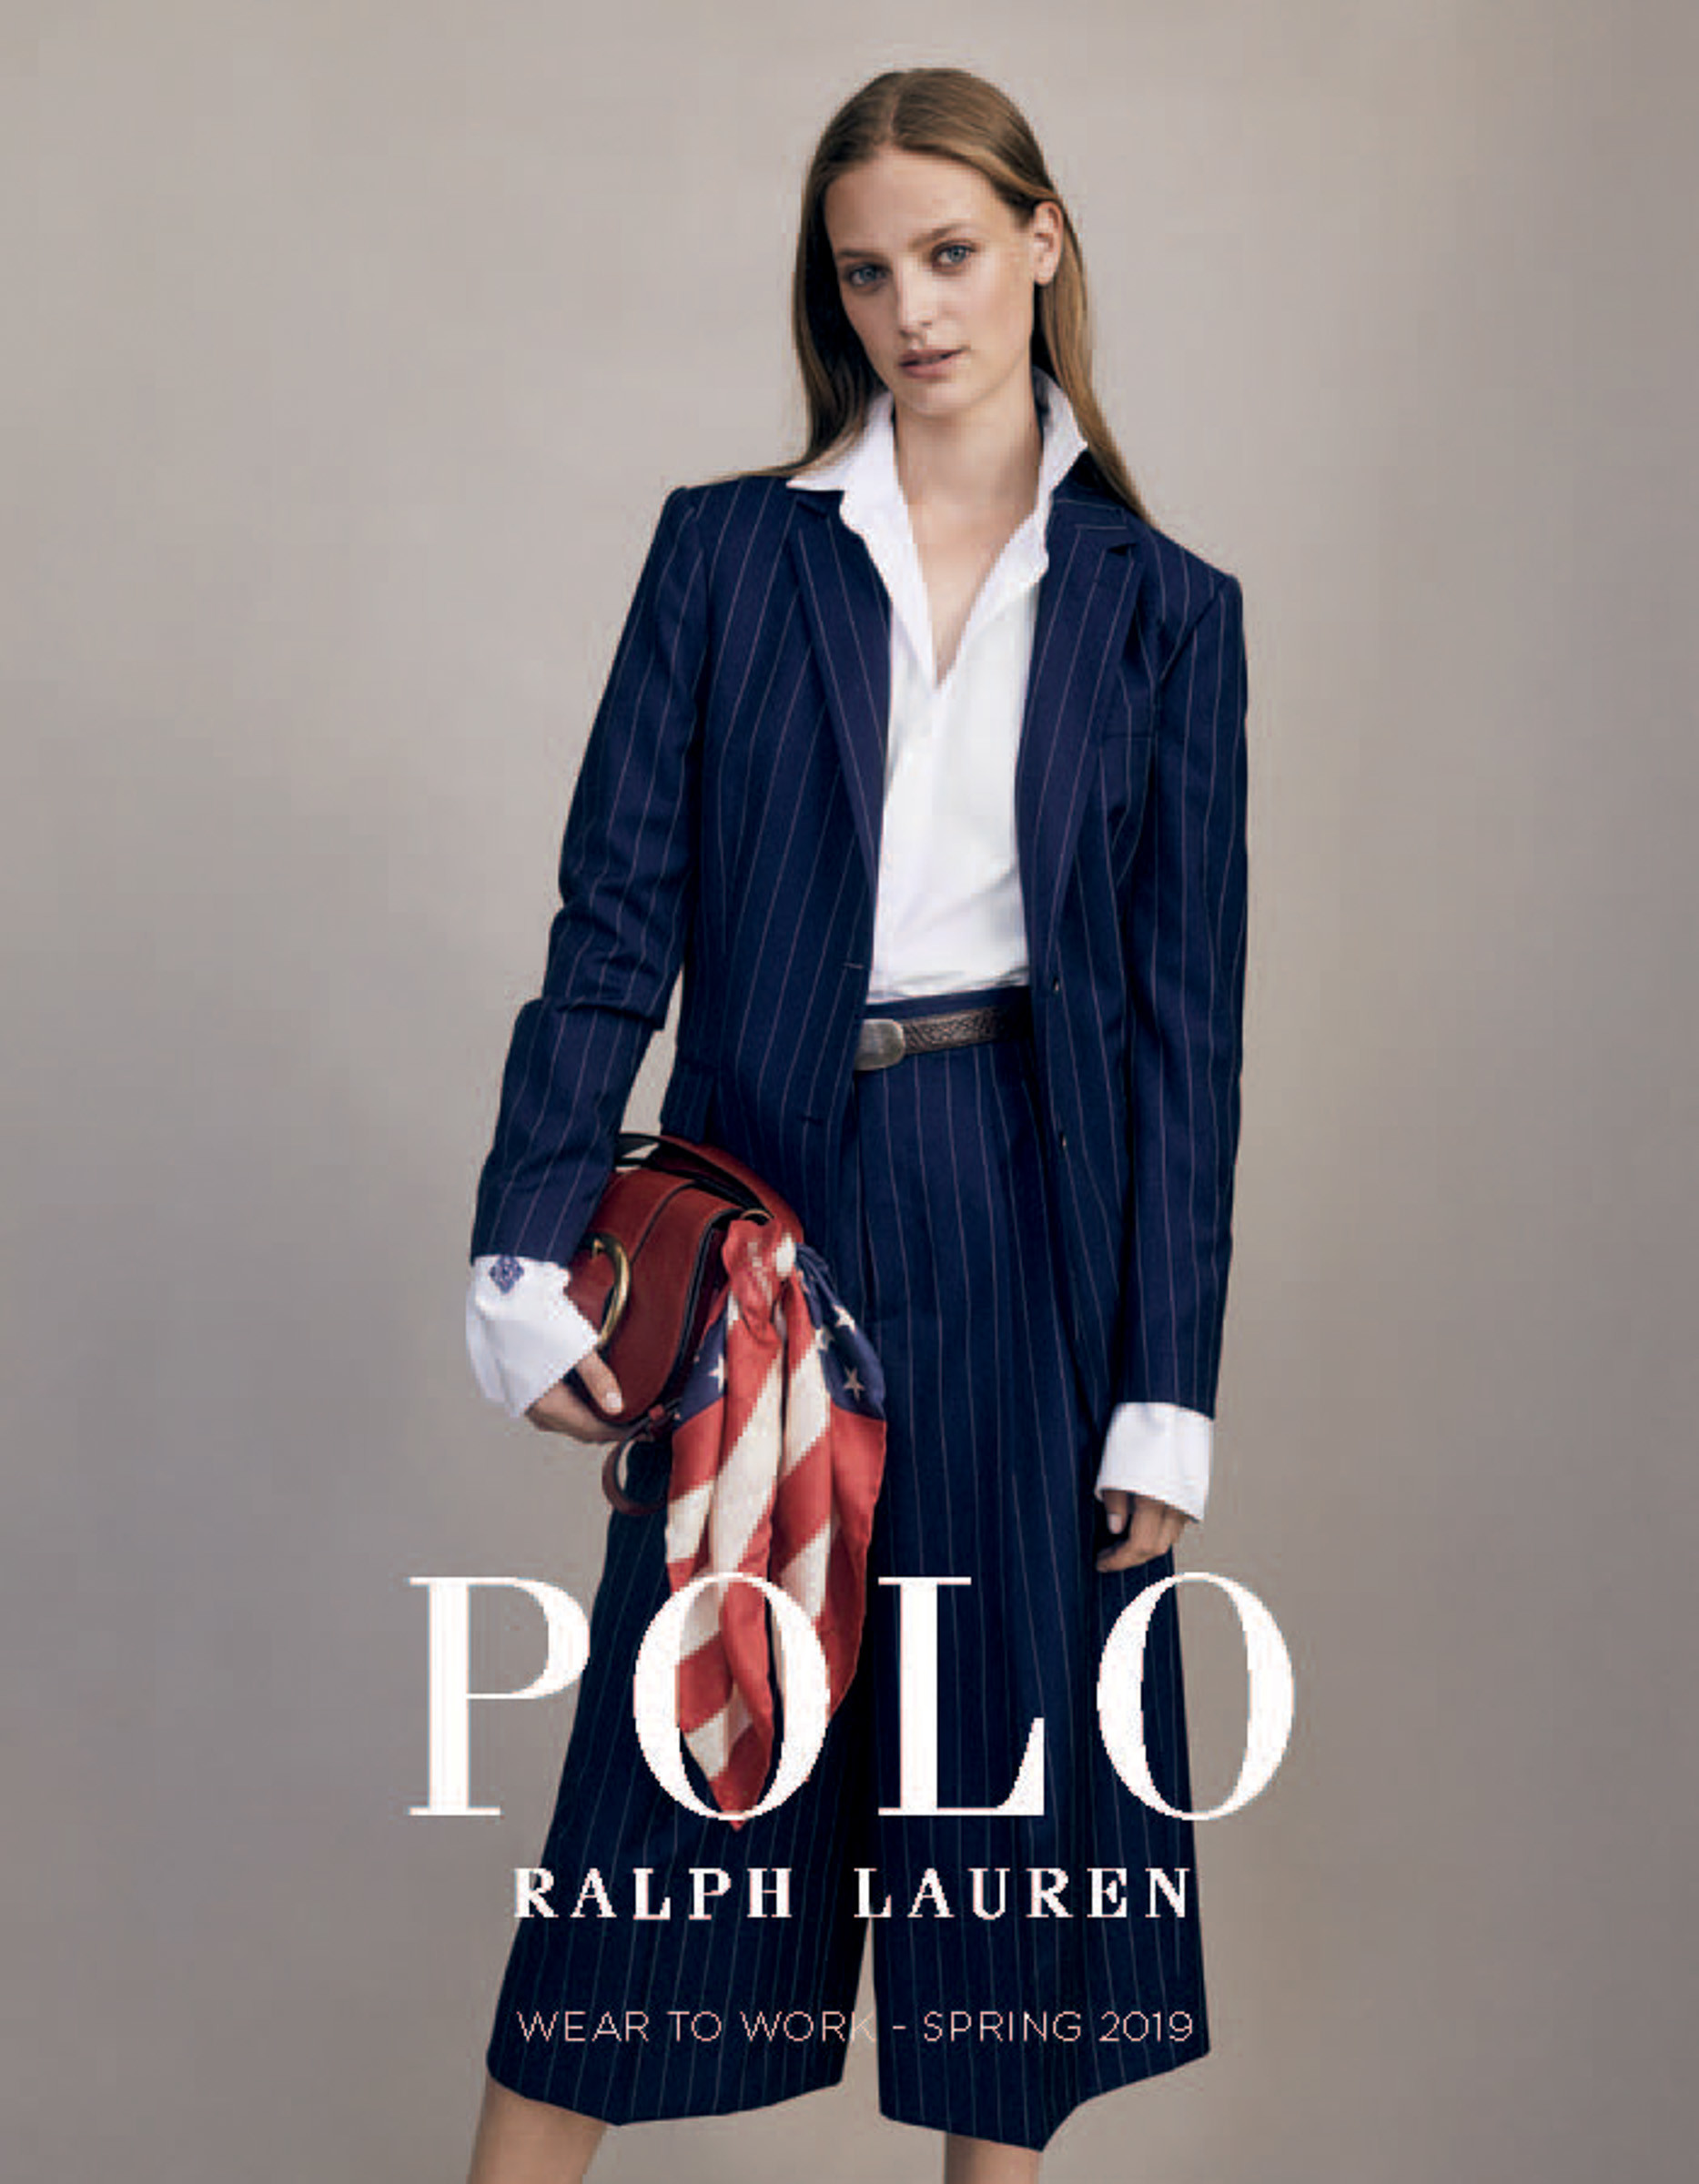 Polo Ralph Lauren Wear To Work 2019 SPRING COLLECTION 